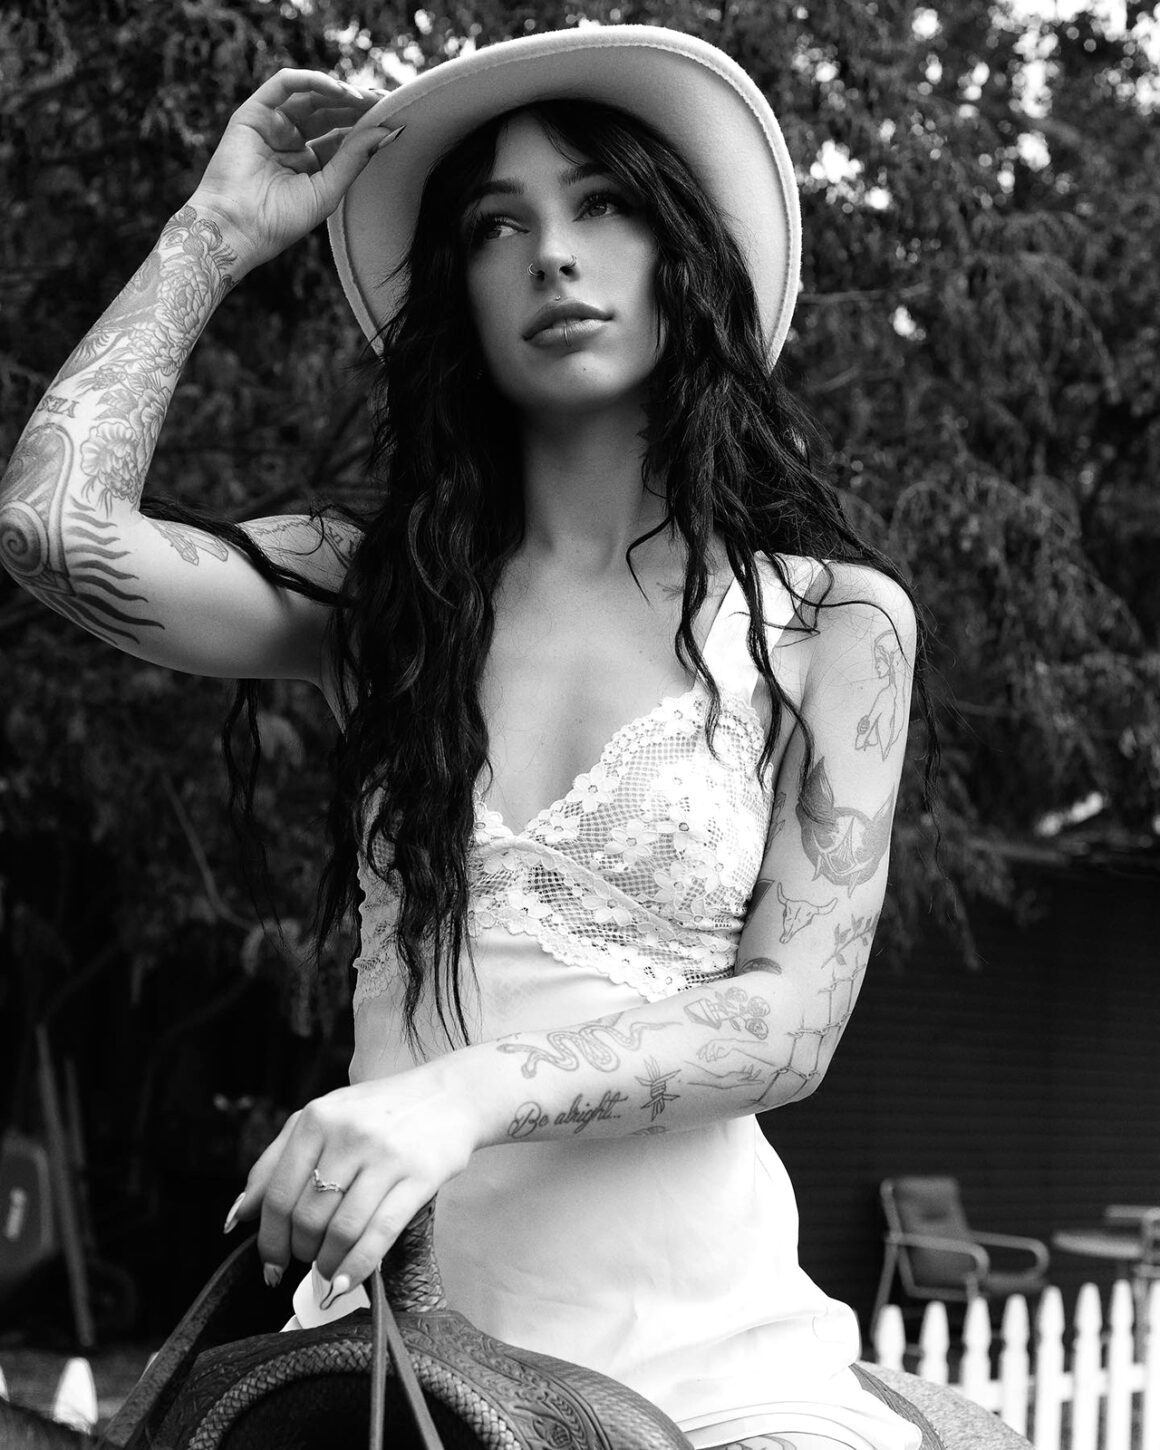 Ally, Tattoo model, photo by @dustingenereux